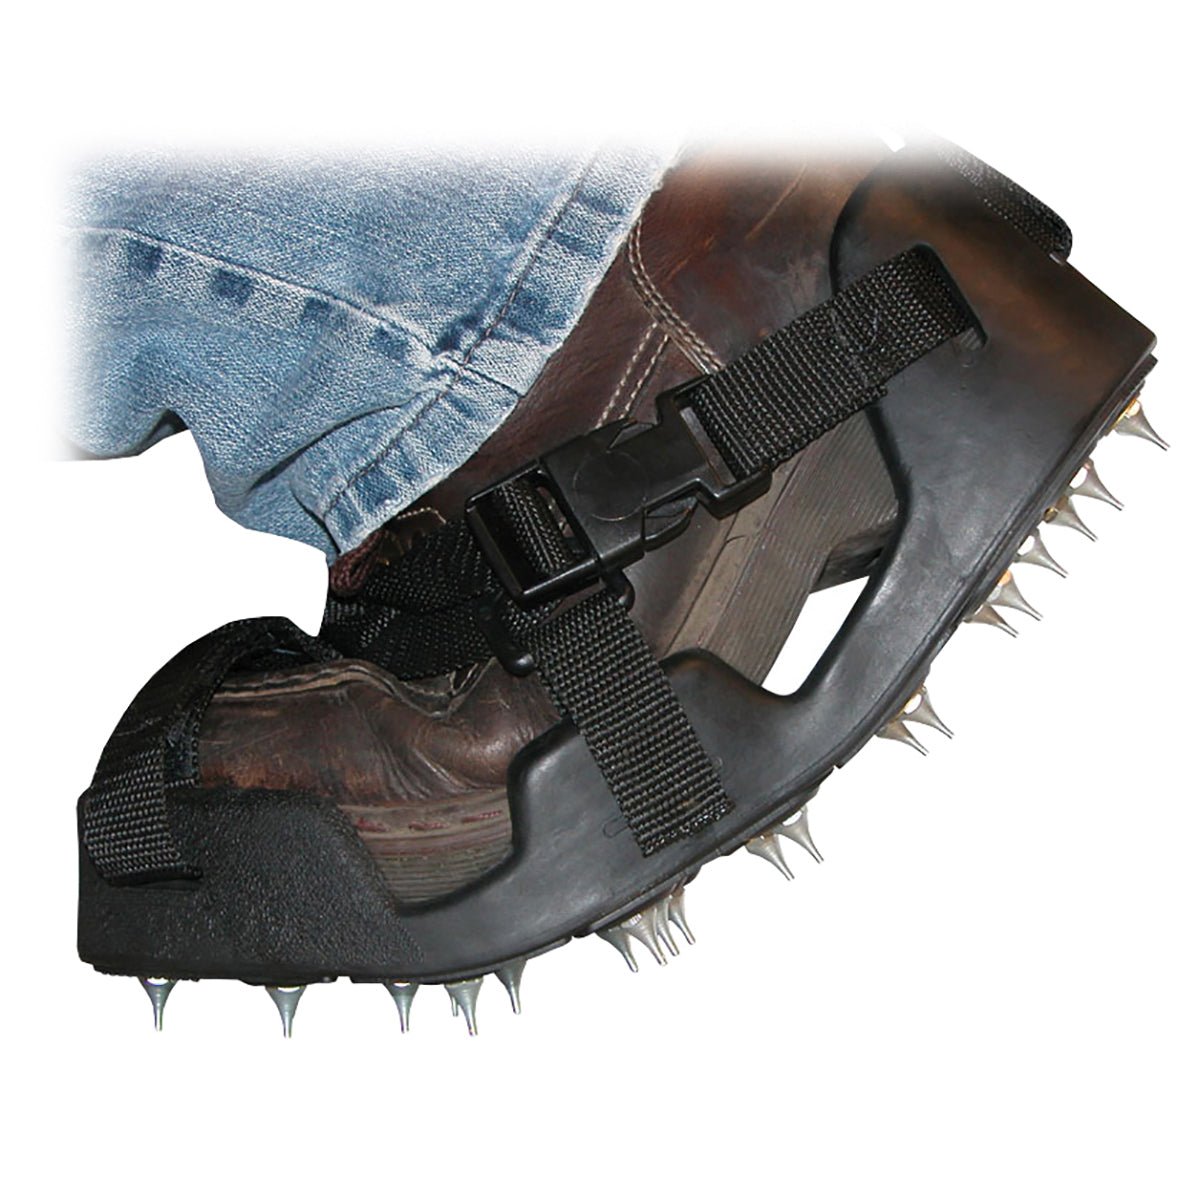 Shoe-In™ Spiked Shoes for Resinous Coatings - Large